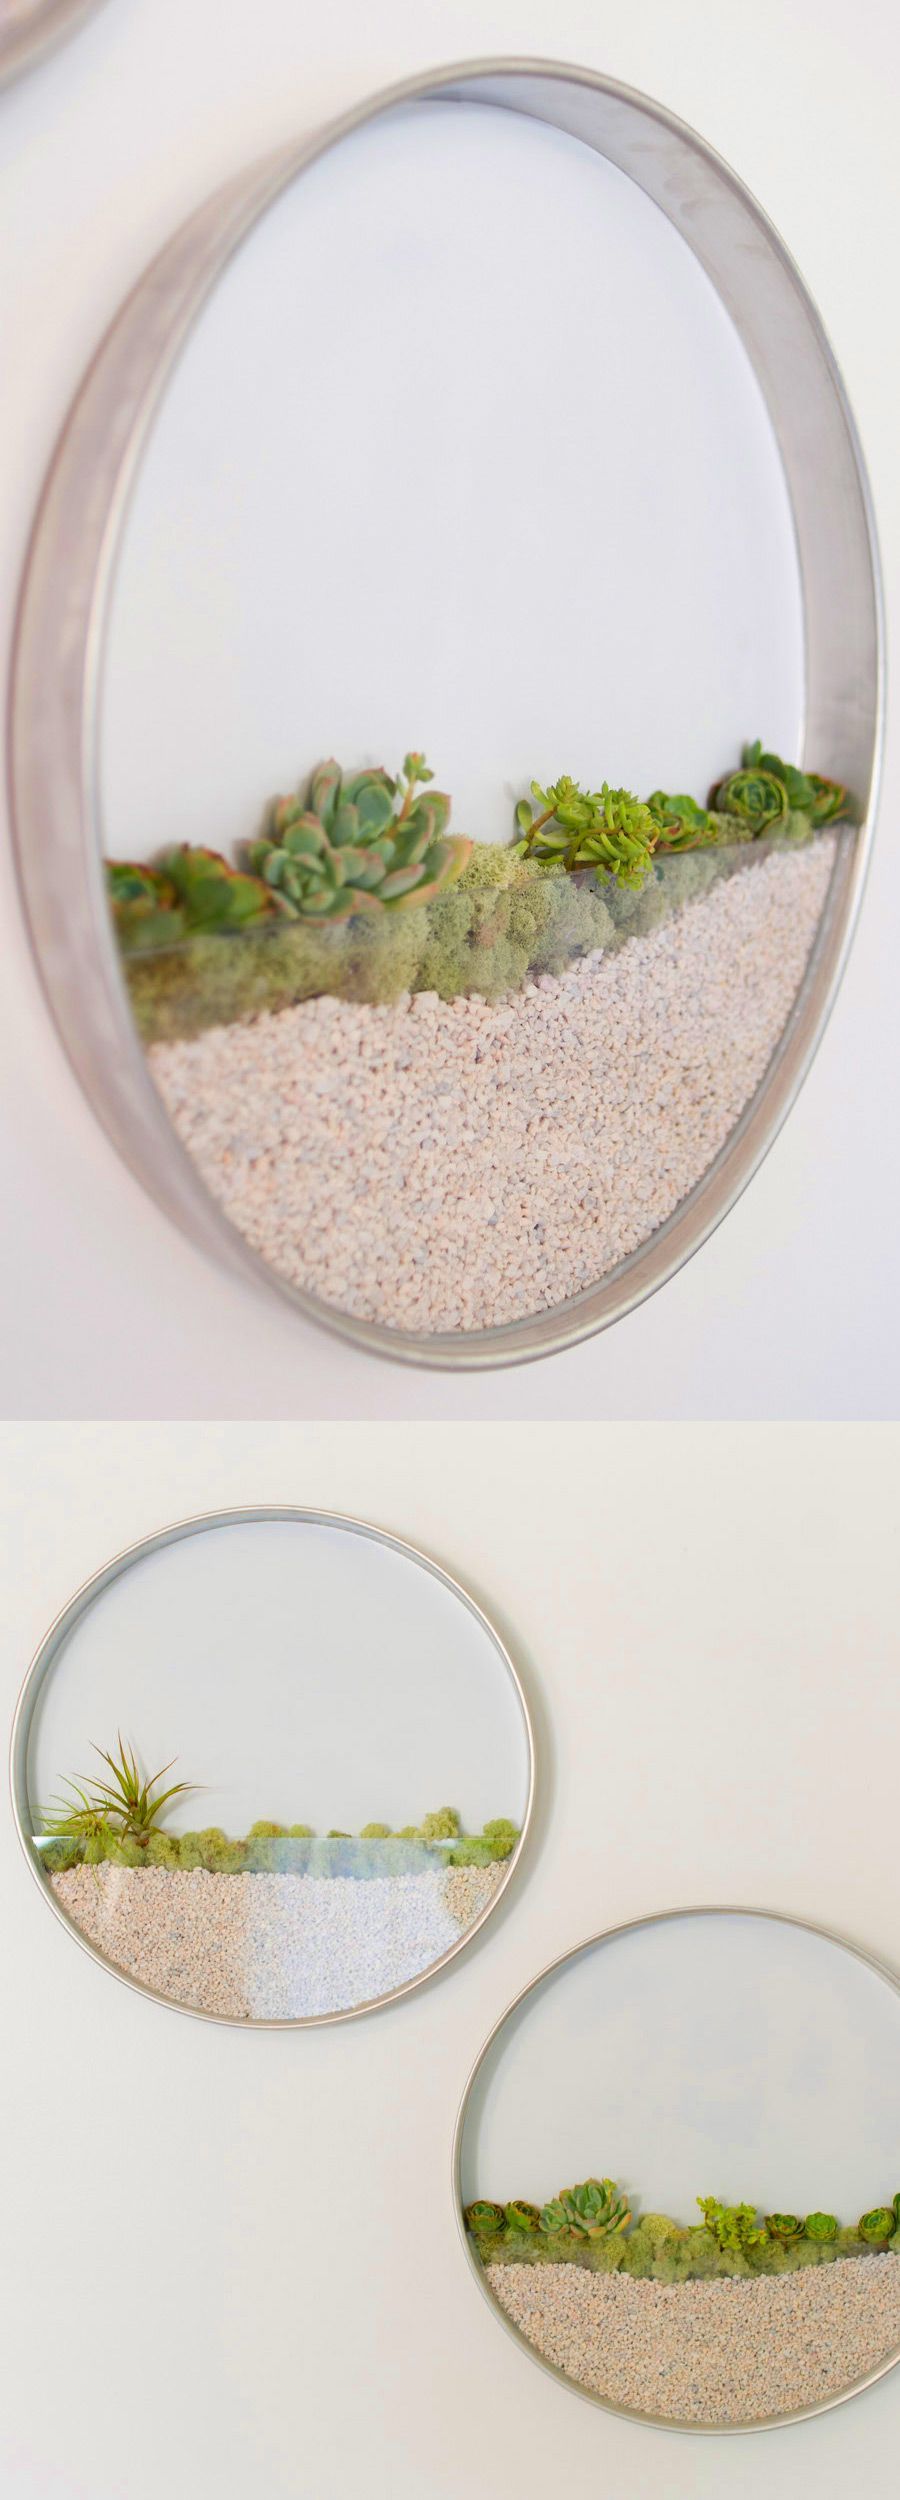 Circular Framed Planters Add Living Art to Your Walls